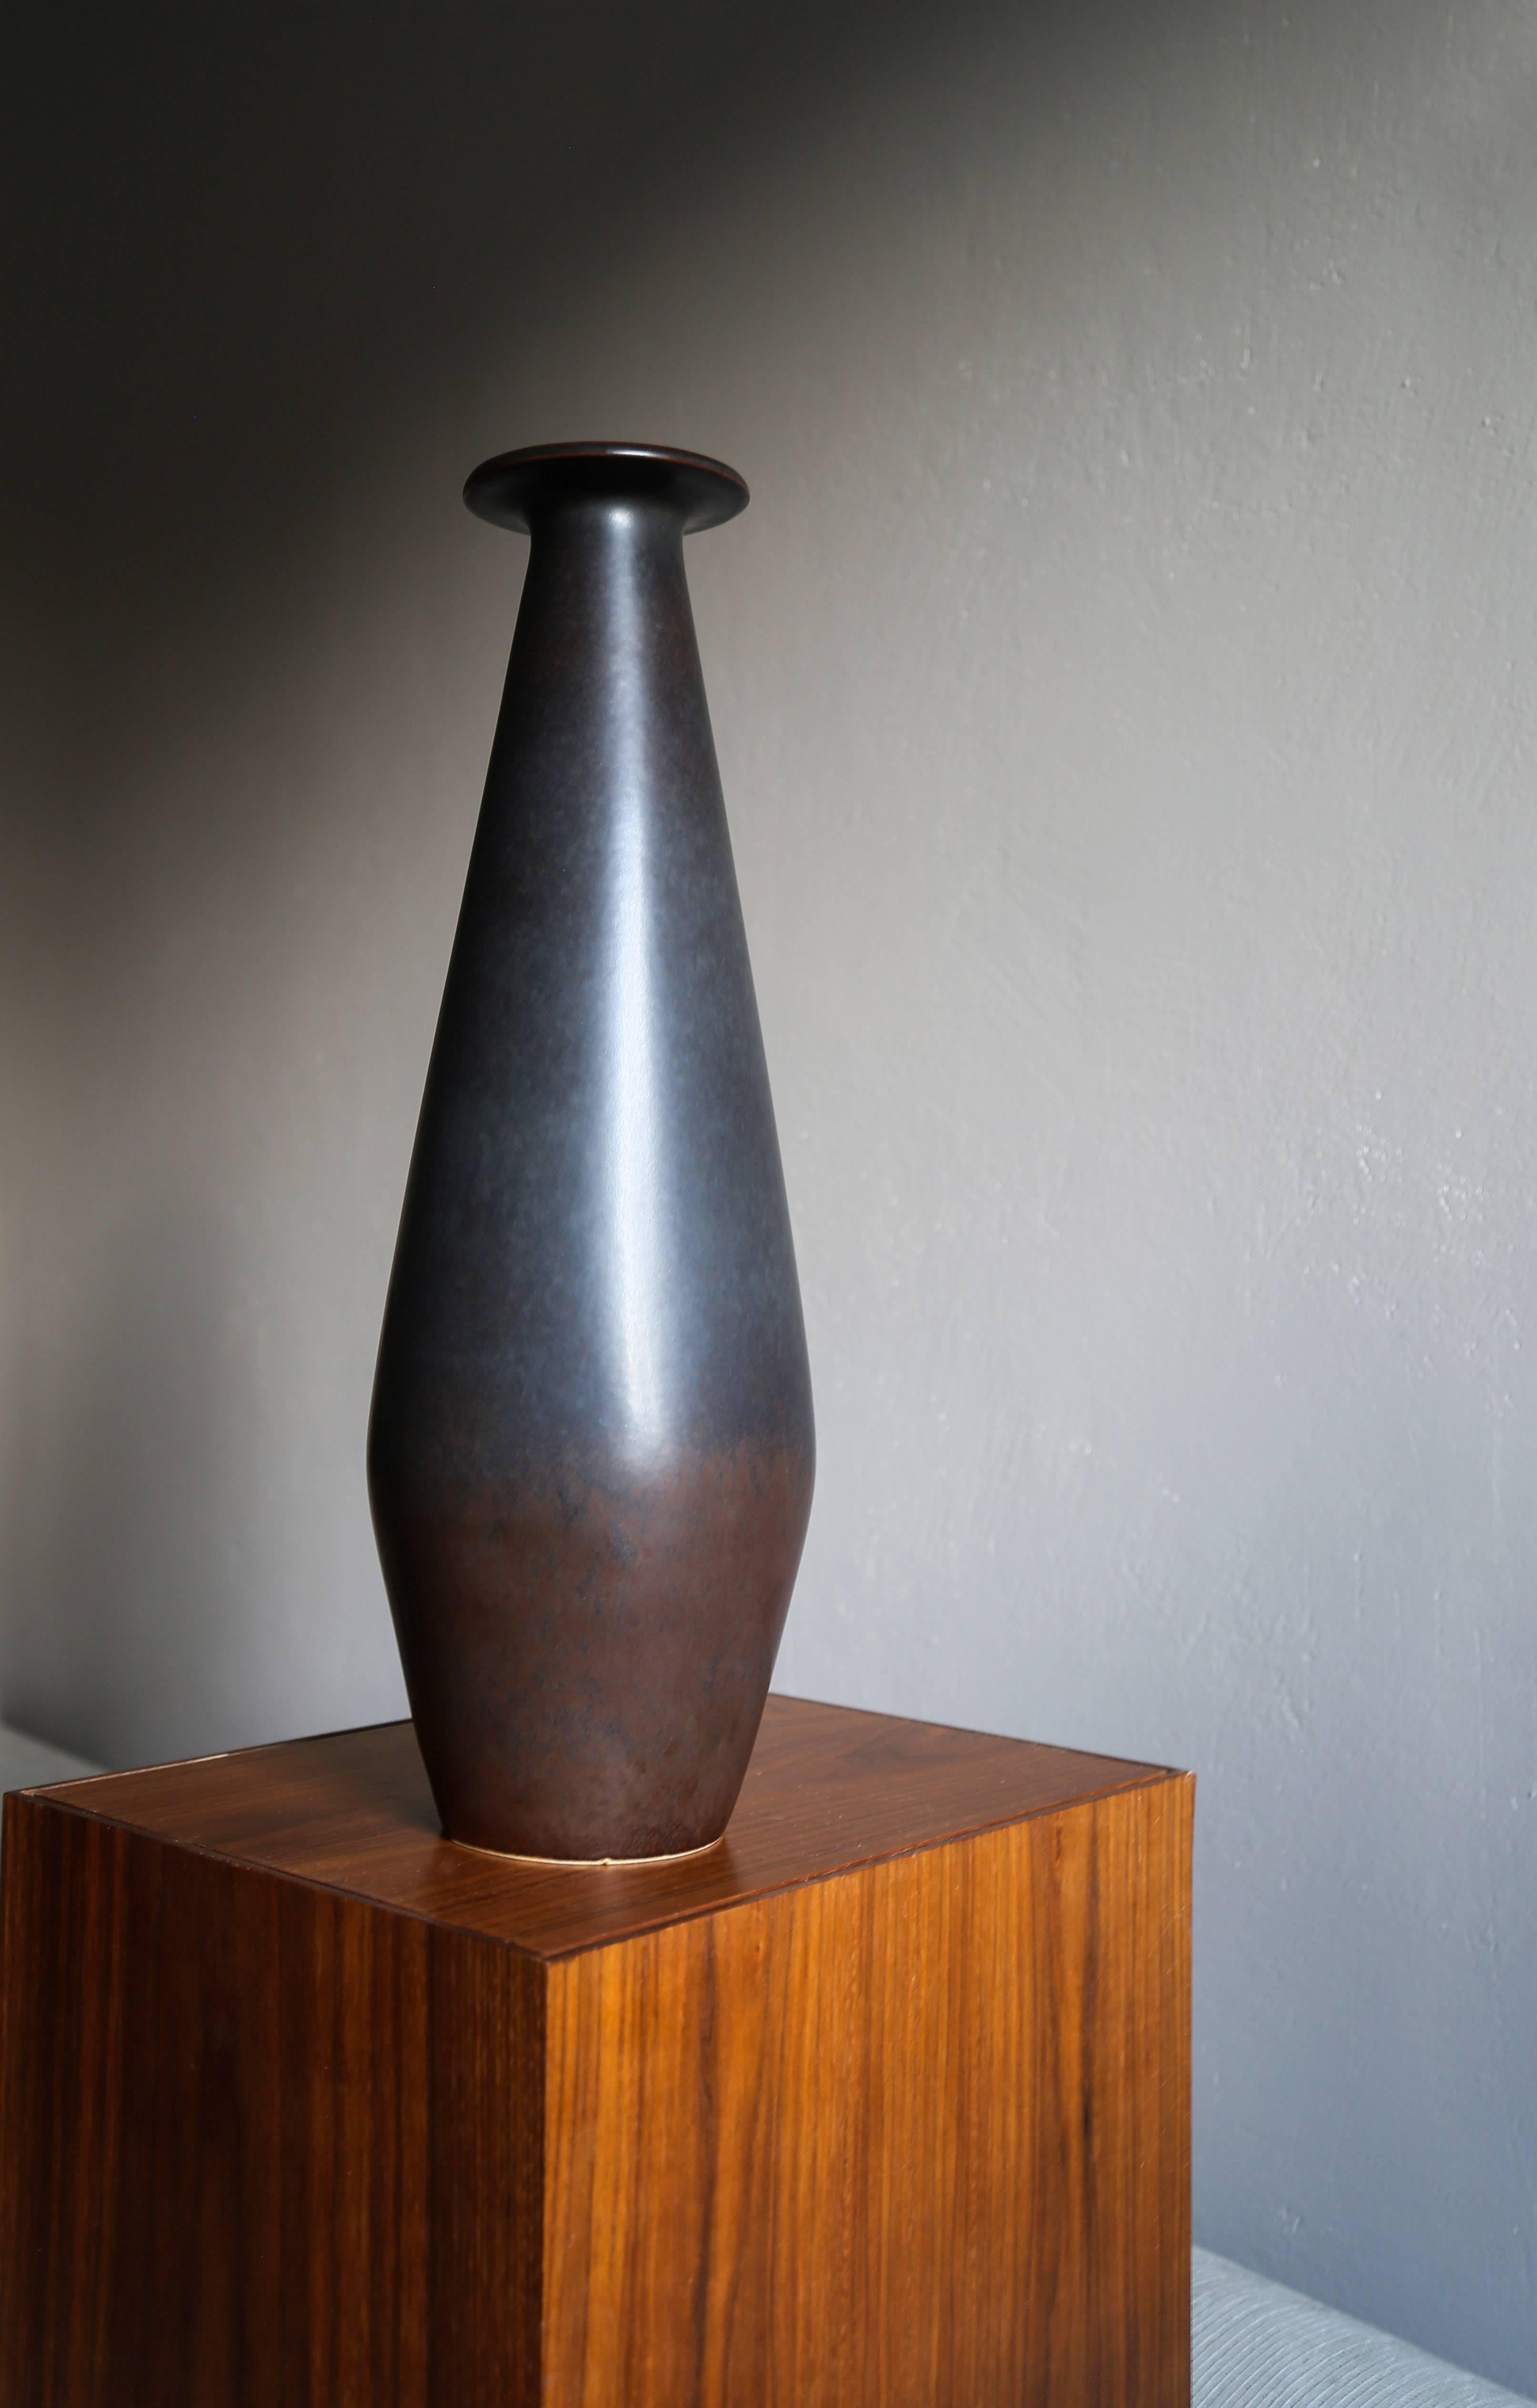 Monumental floor vase by a Swedish ceramist Gunnar Nylund, Model AXT.

Manufactured by Rörstrand Ab, Sweden, circa 1950s. 

Material matte glazed stoneware in brown, grey and mauve color tones.

Signed underside with designer's initials GN,